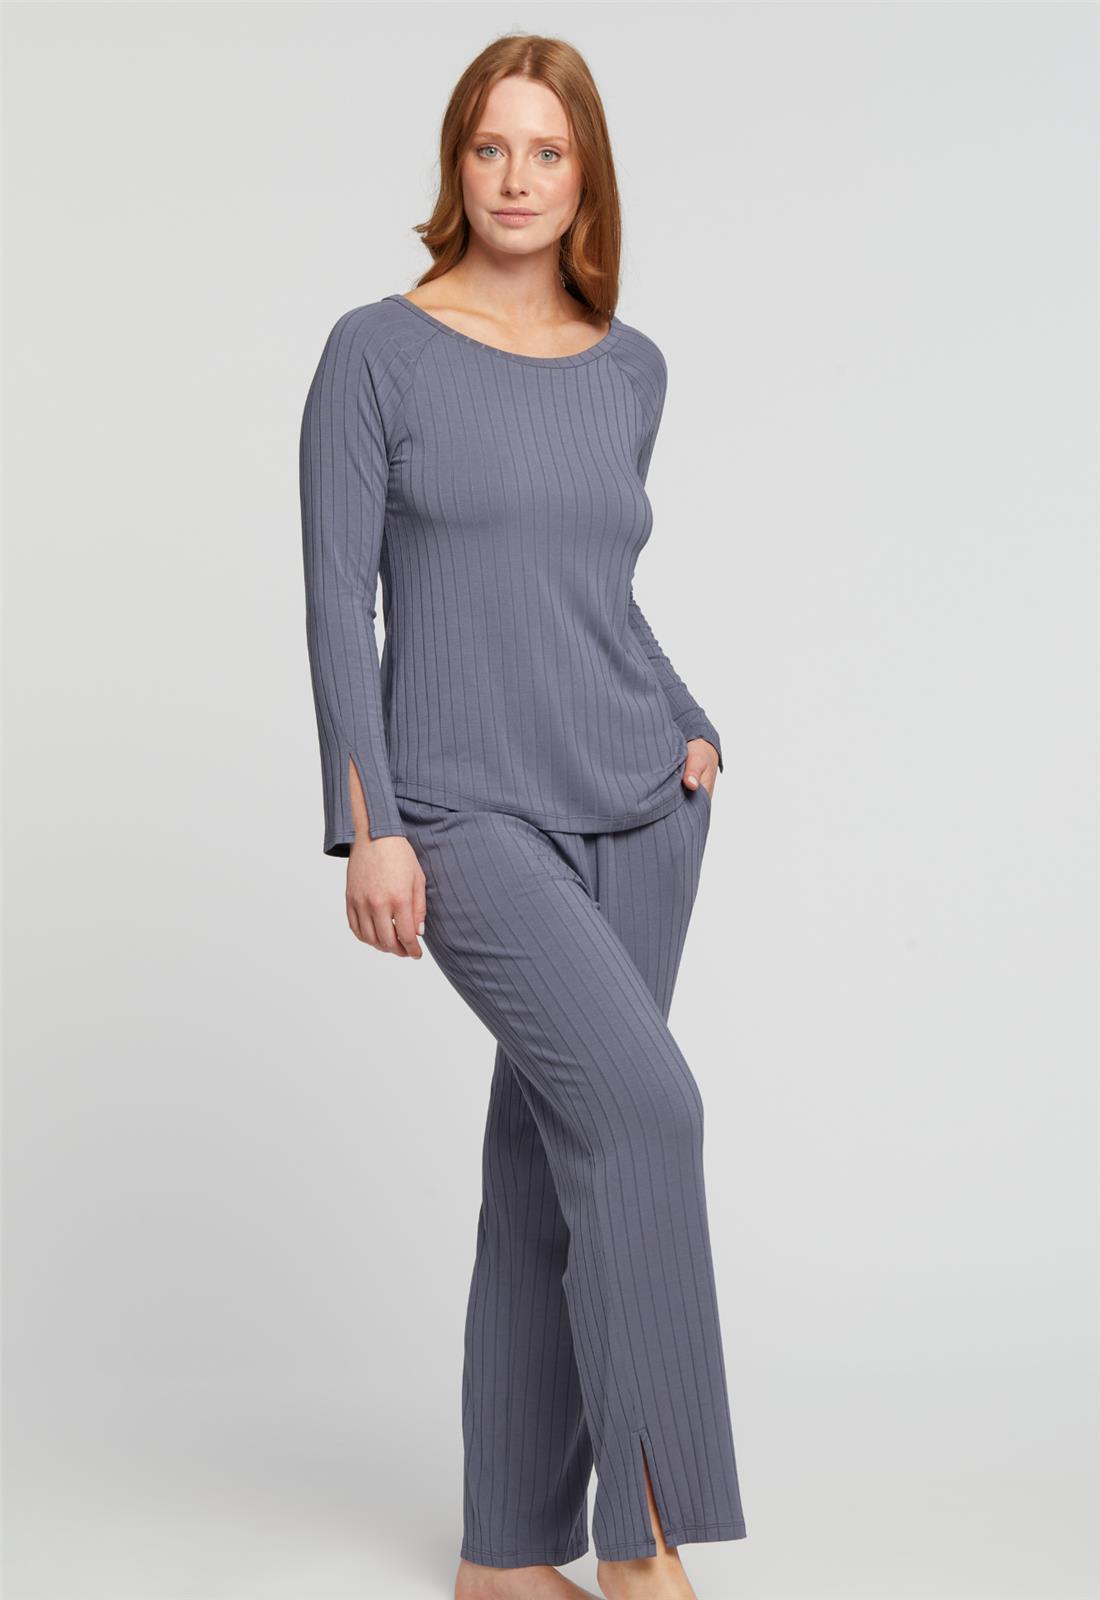 Ribbed Long Sleeve PJ Set - French Grey worn by model front view